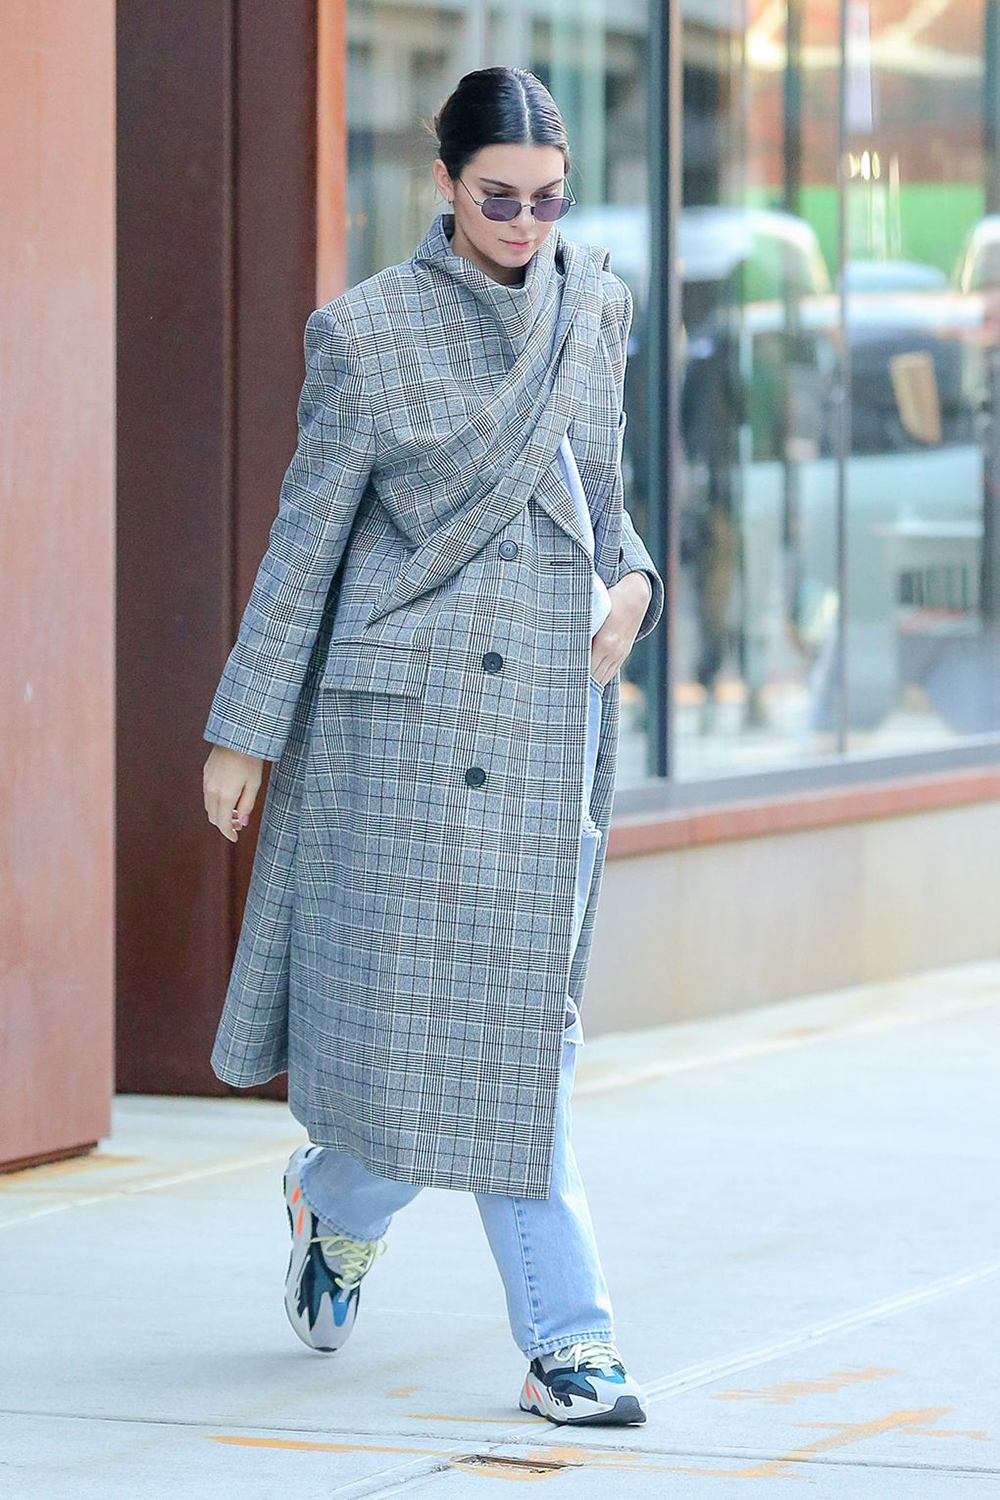 The queen of cool, Kendall Jenner, took to the streets in a beautiful plaid Balenciaga coat with scarf wrap detailing and sneans to complete the look.